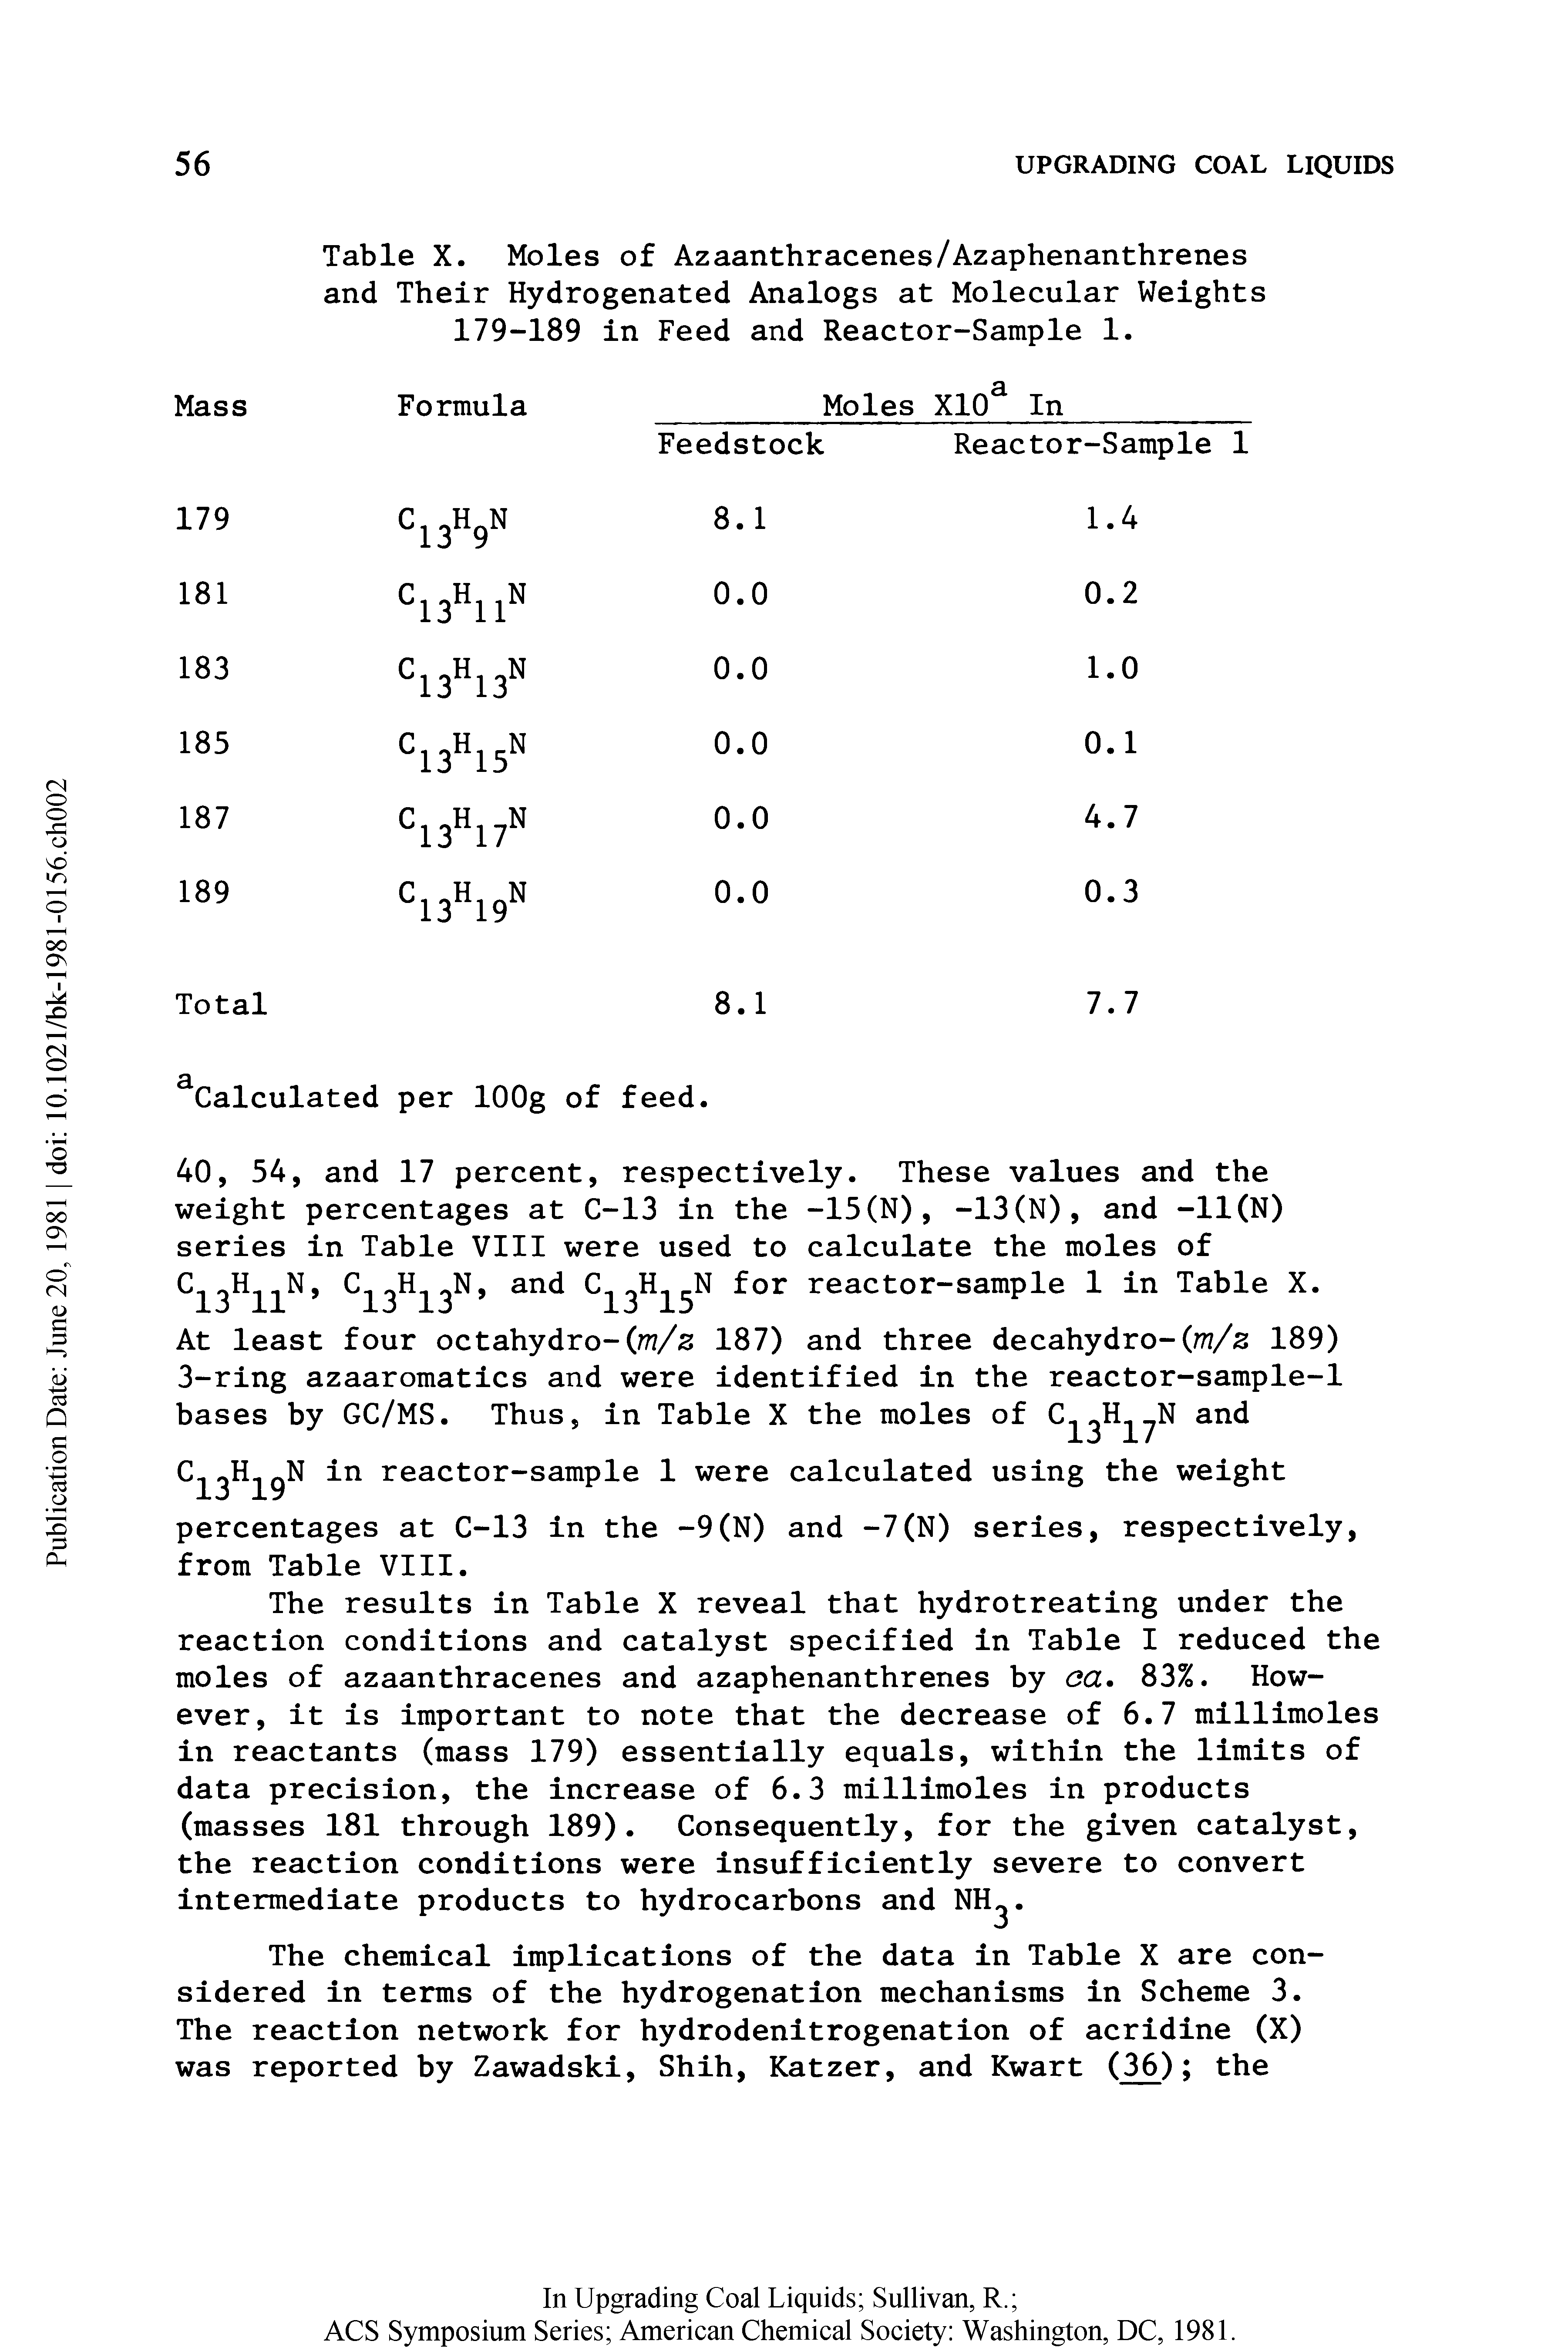 Table X. Moles of Azaanthracenes/Azaphenanthrenes and Their Hydrogenated Analogs at Molecular Weights 179-189 in Feed and Reactor-Sample 1.